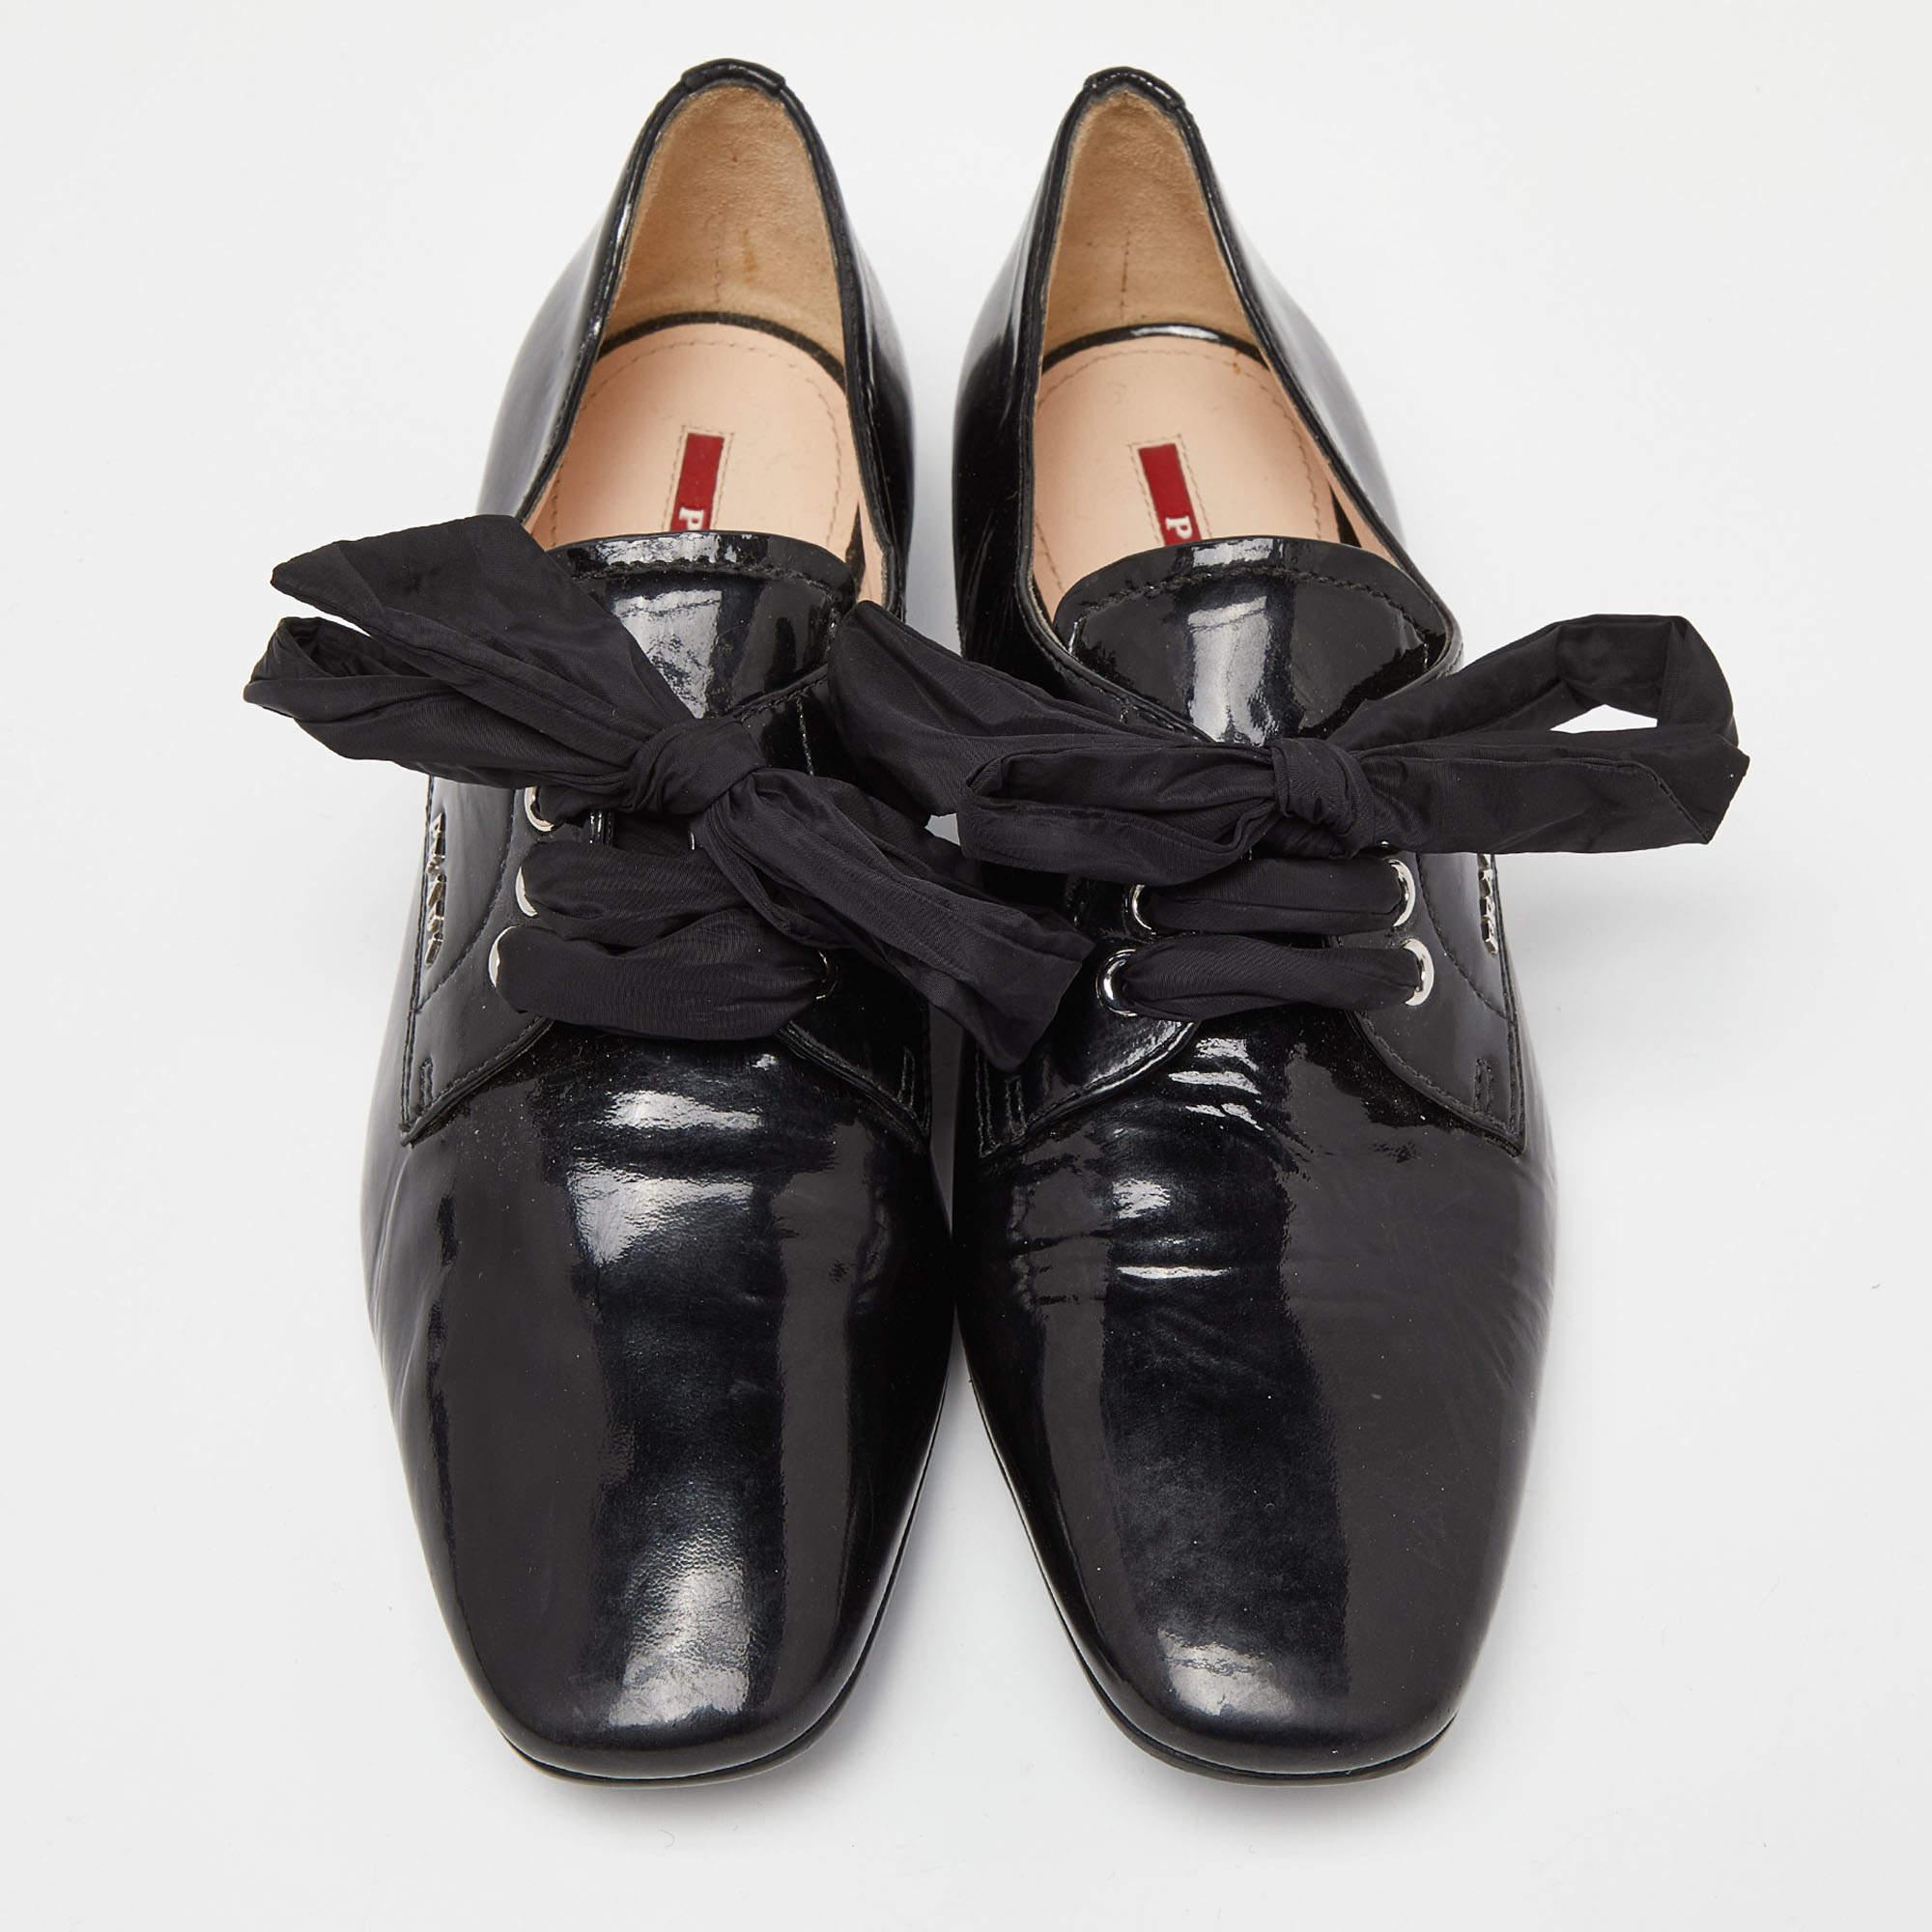 Women's Prada Black Patent Leather Lace Up Derby Size 37